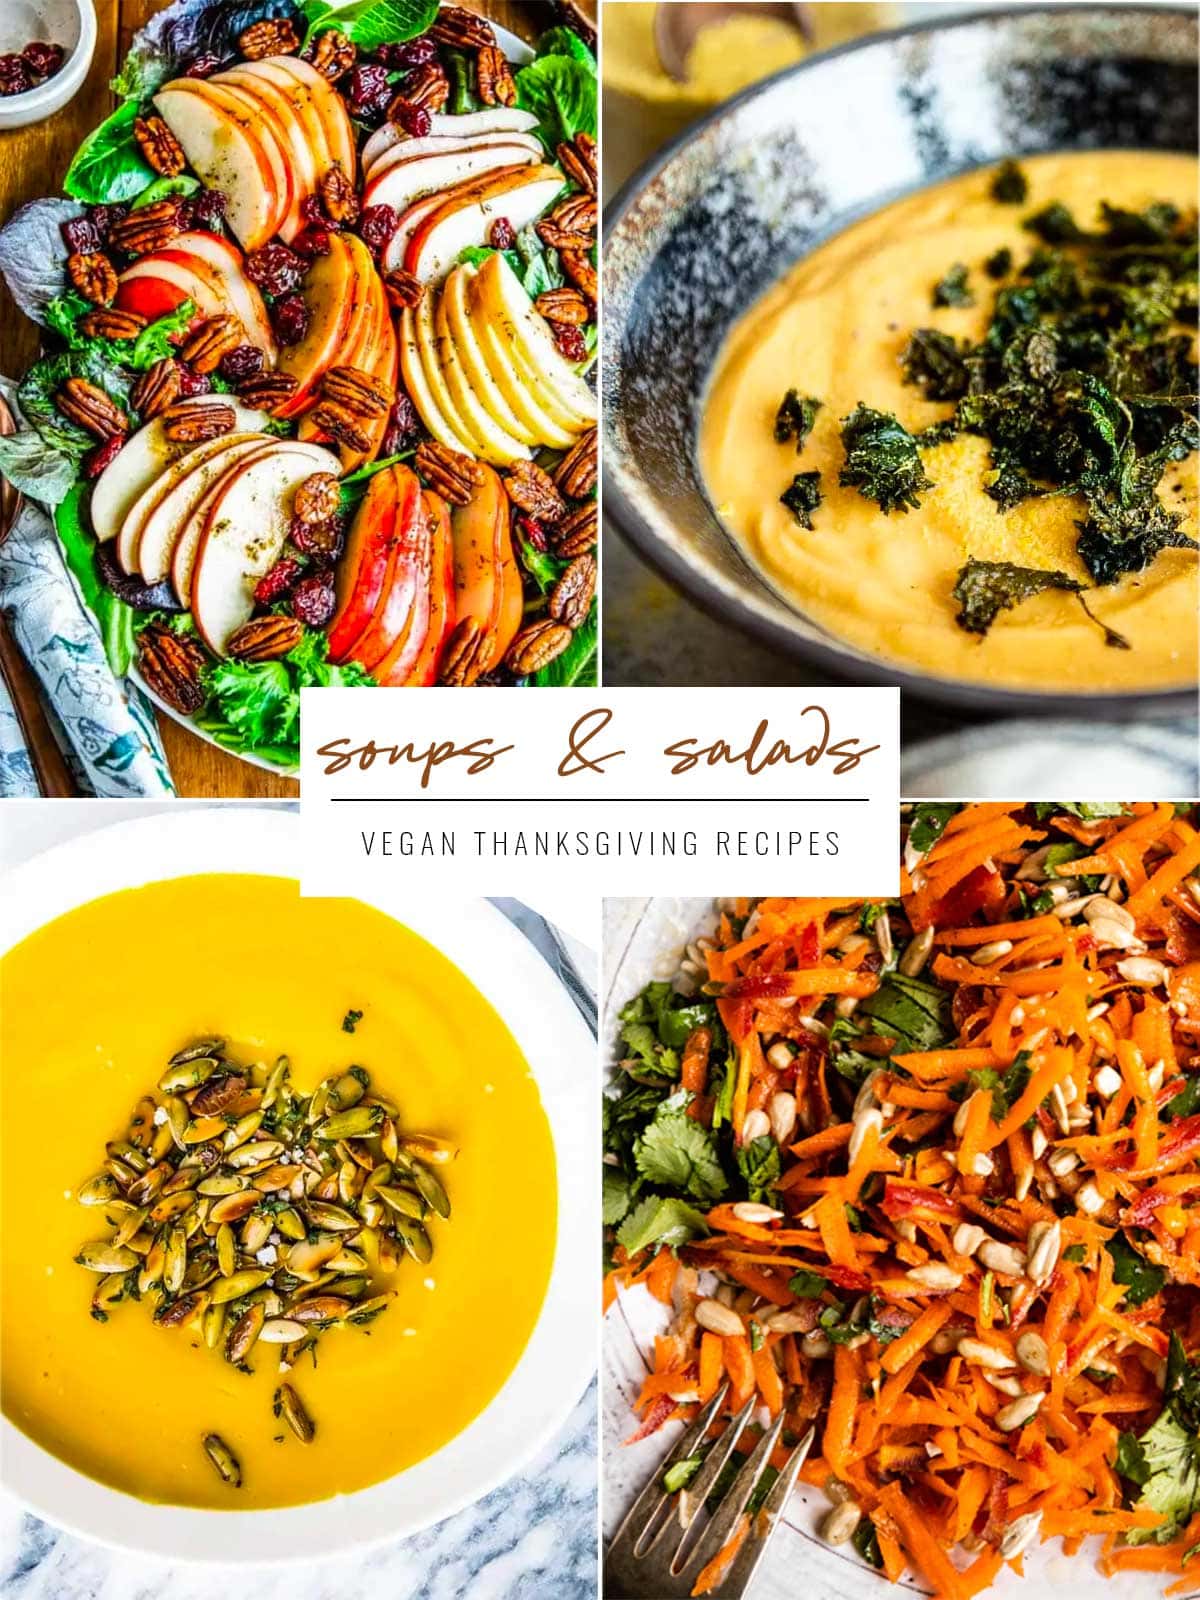 4 images with words soups and salads for Vegan Thanksgiving written on top. Images include fall salad, potato soup, pumpkin soup and carrot salad.